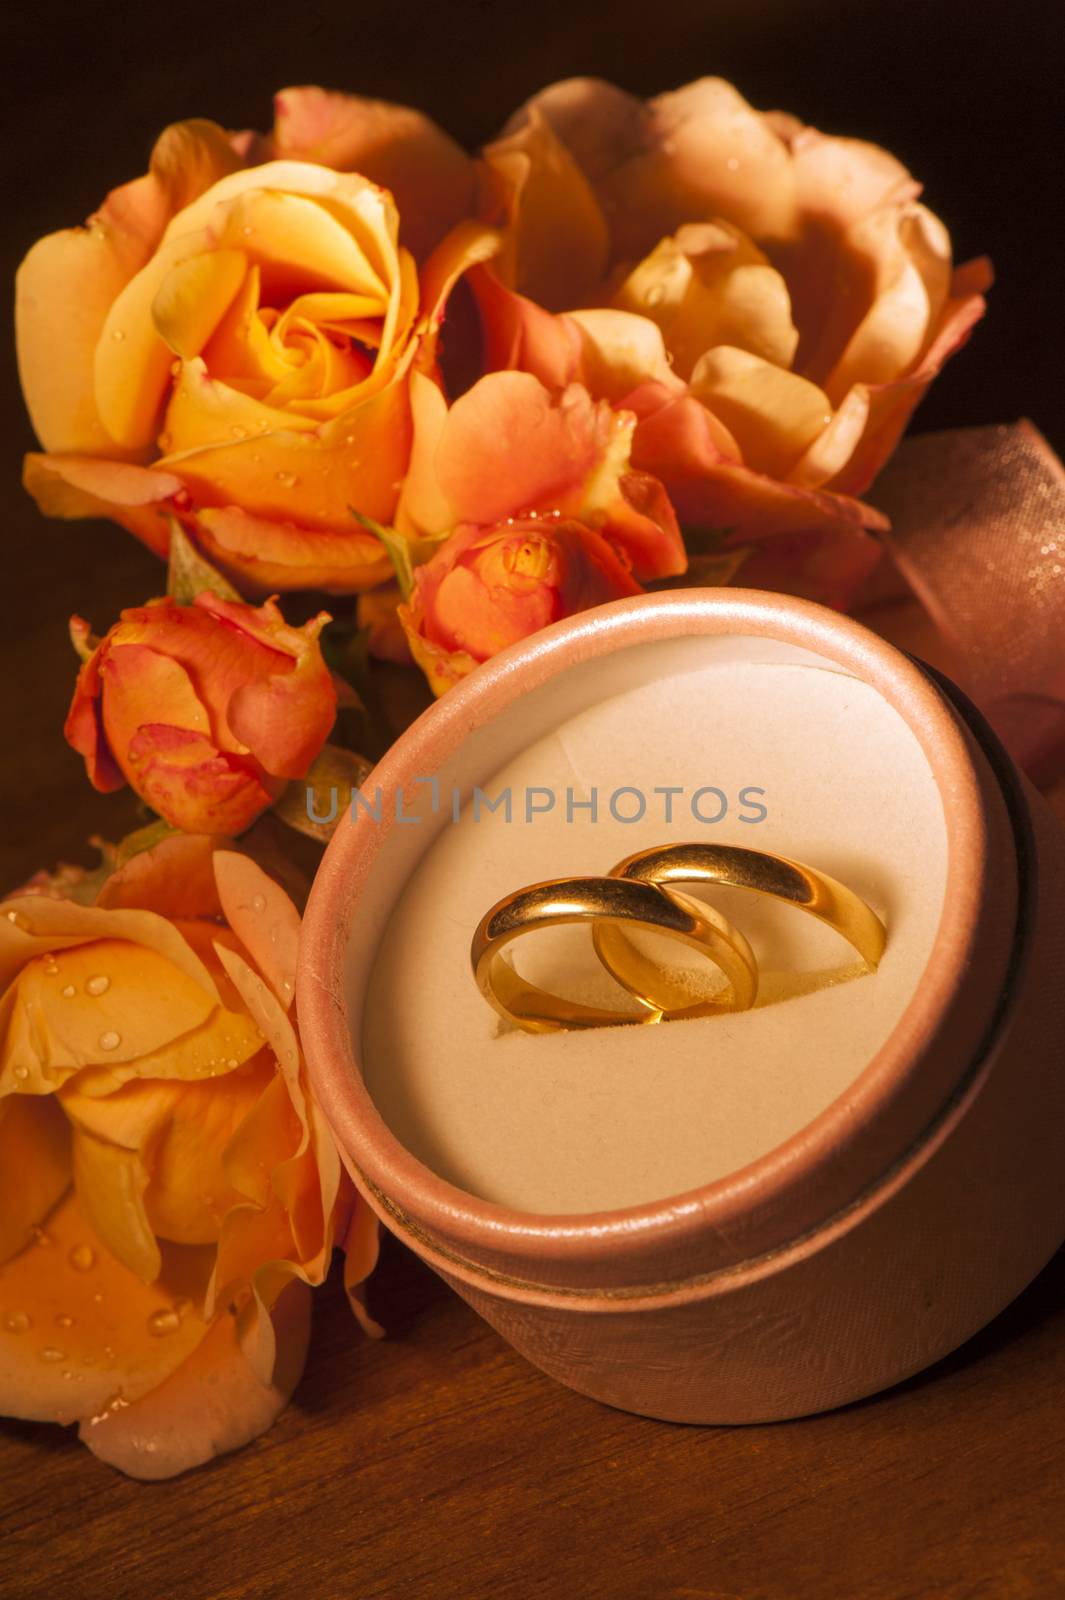  wedding rings on  on a small wooden table